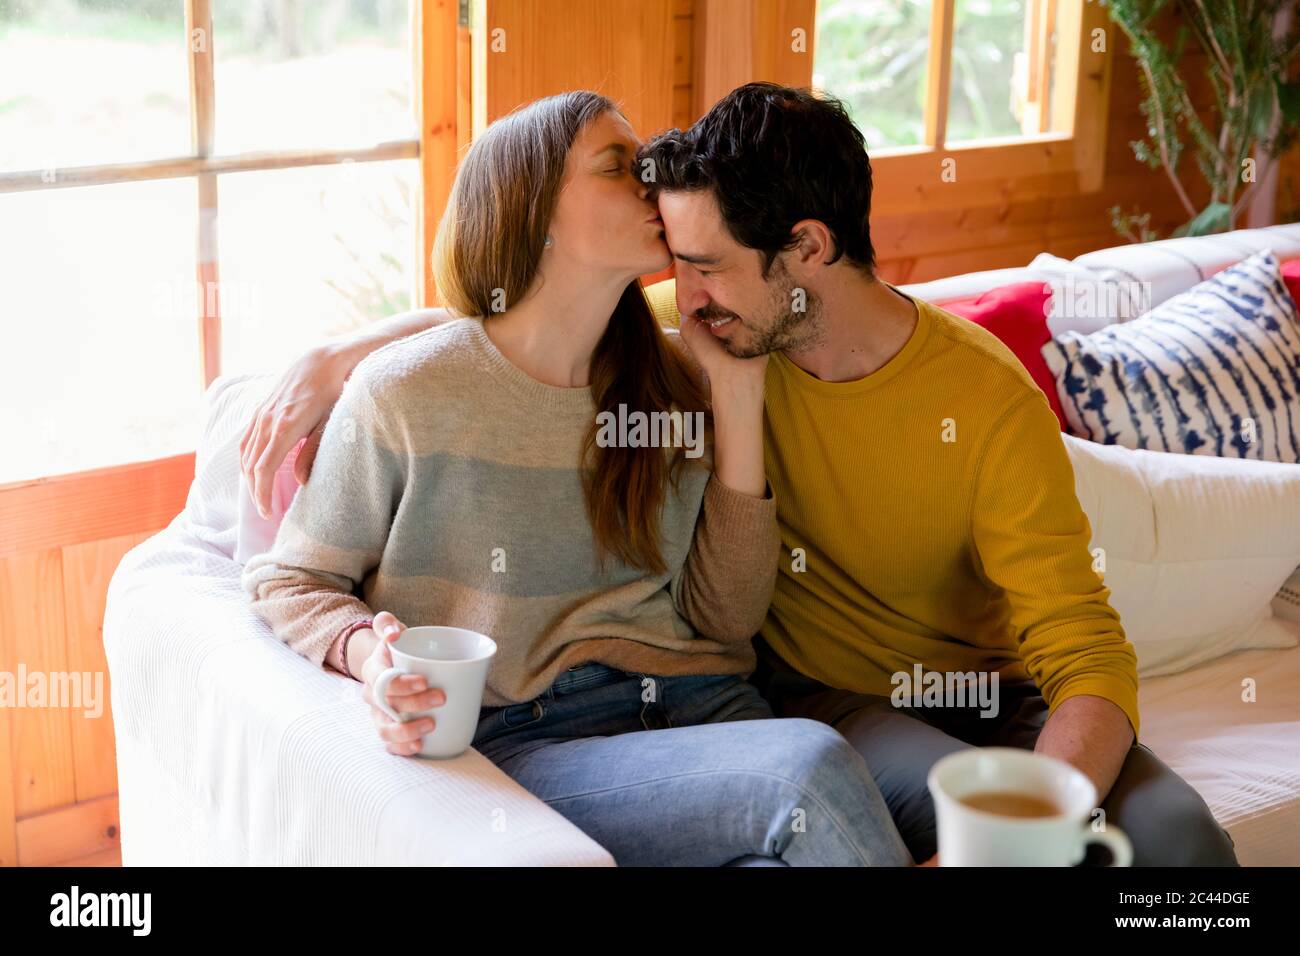 Romantic woman kissing on boyfriend's forehead while sitting over sofa in log cabin Stock Photo